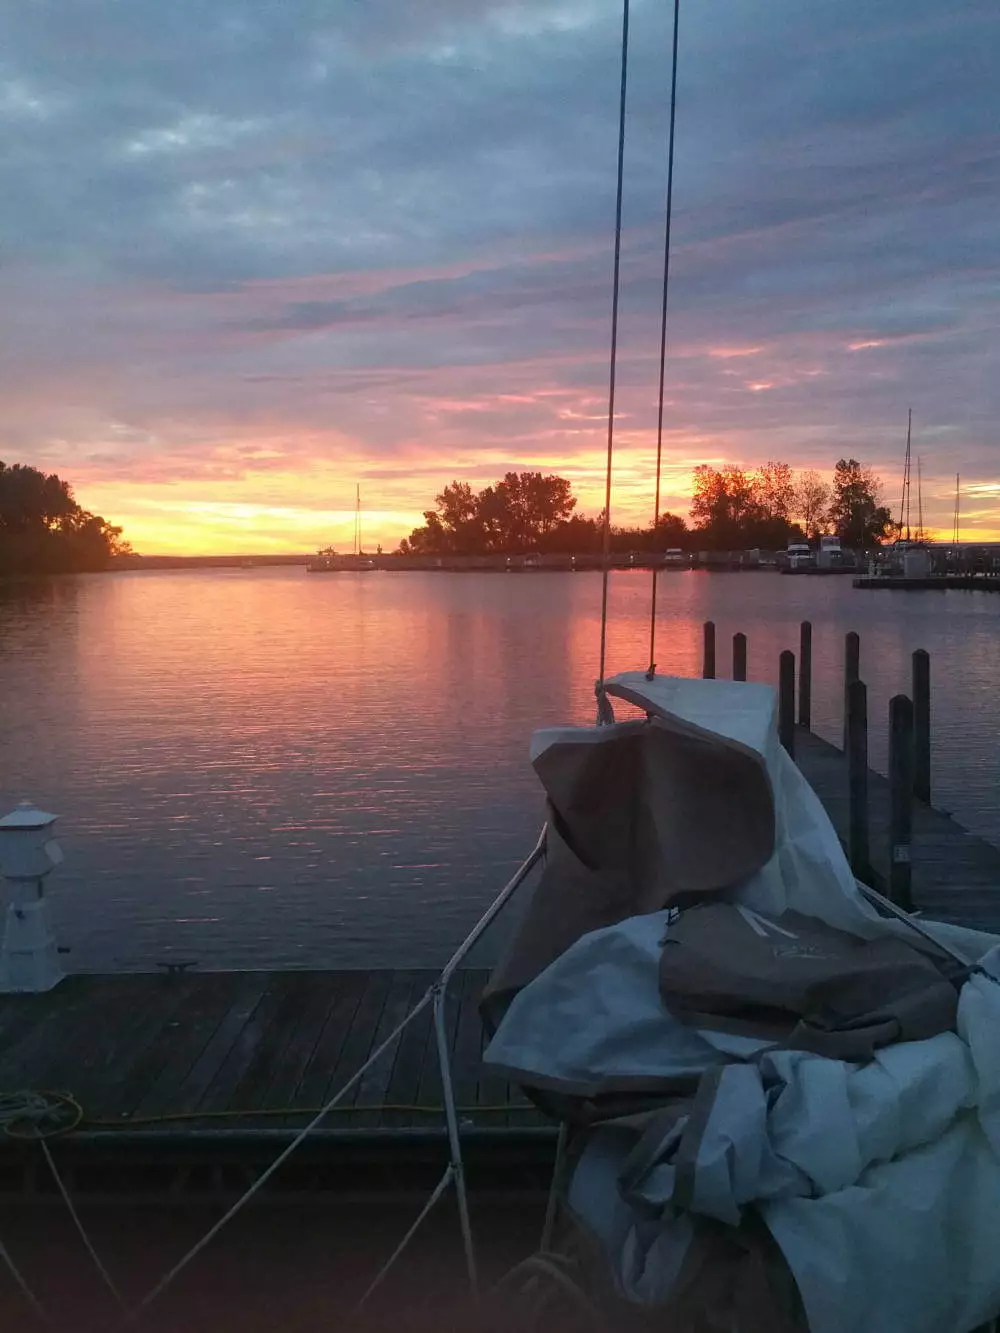 A sailboat at a dock Middle Bass Island in a sunset